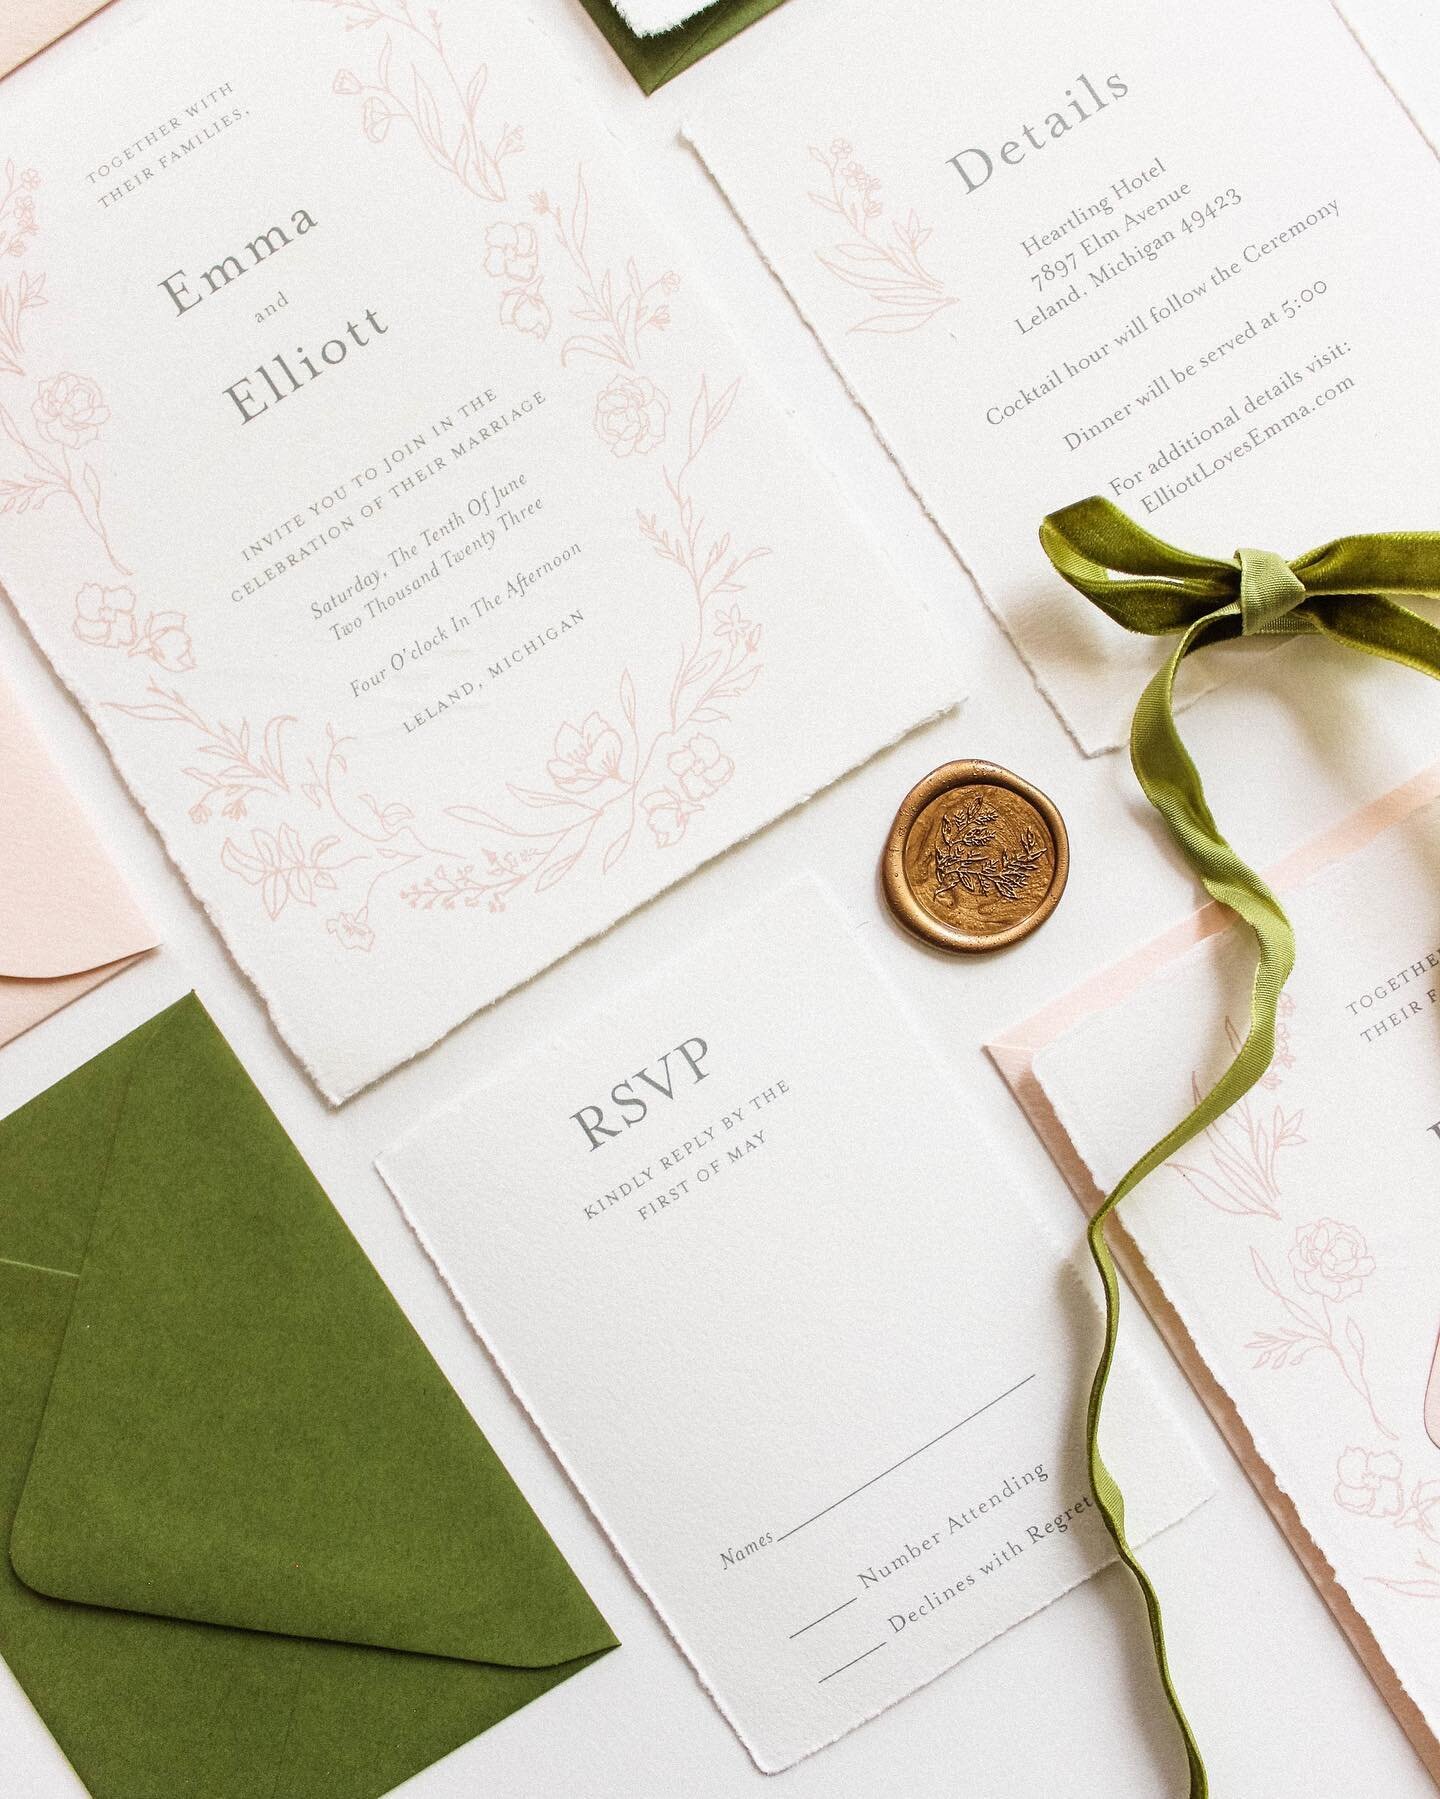 Your wedding invitations are your guests&rsquo; first impression of your wedding day &mdash; first impressions matter ✨